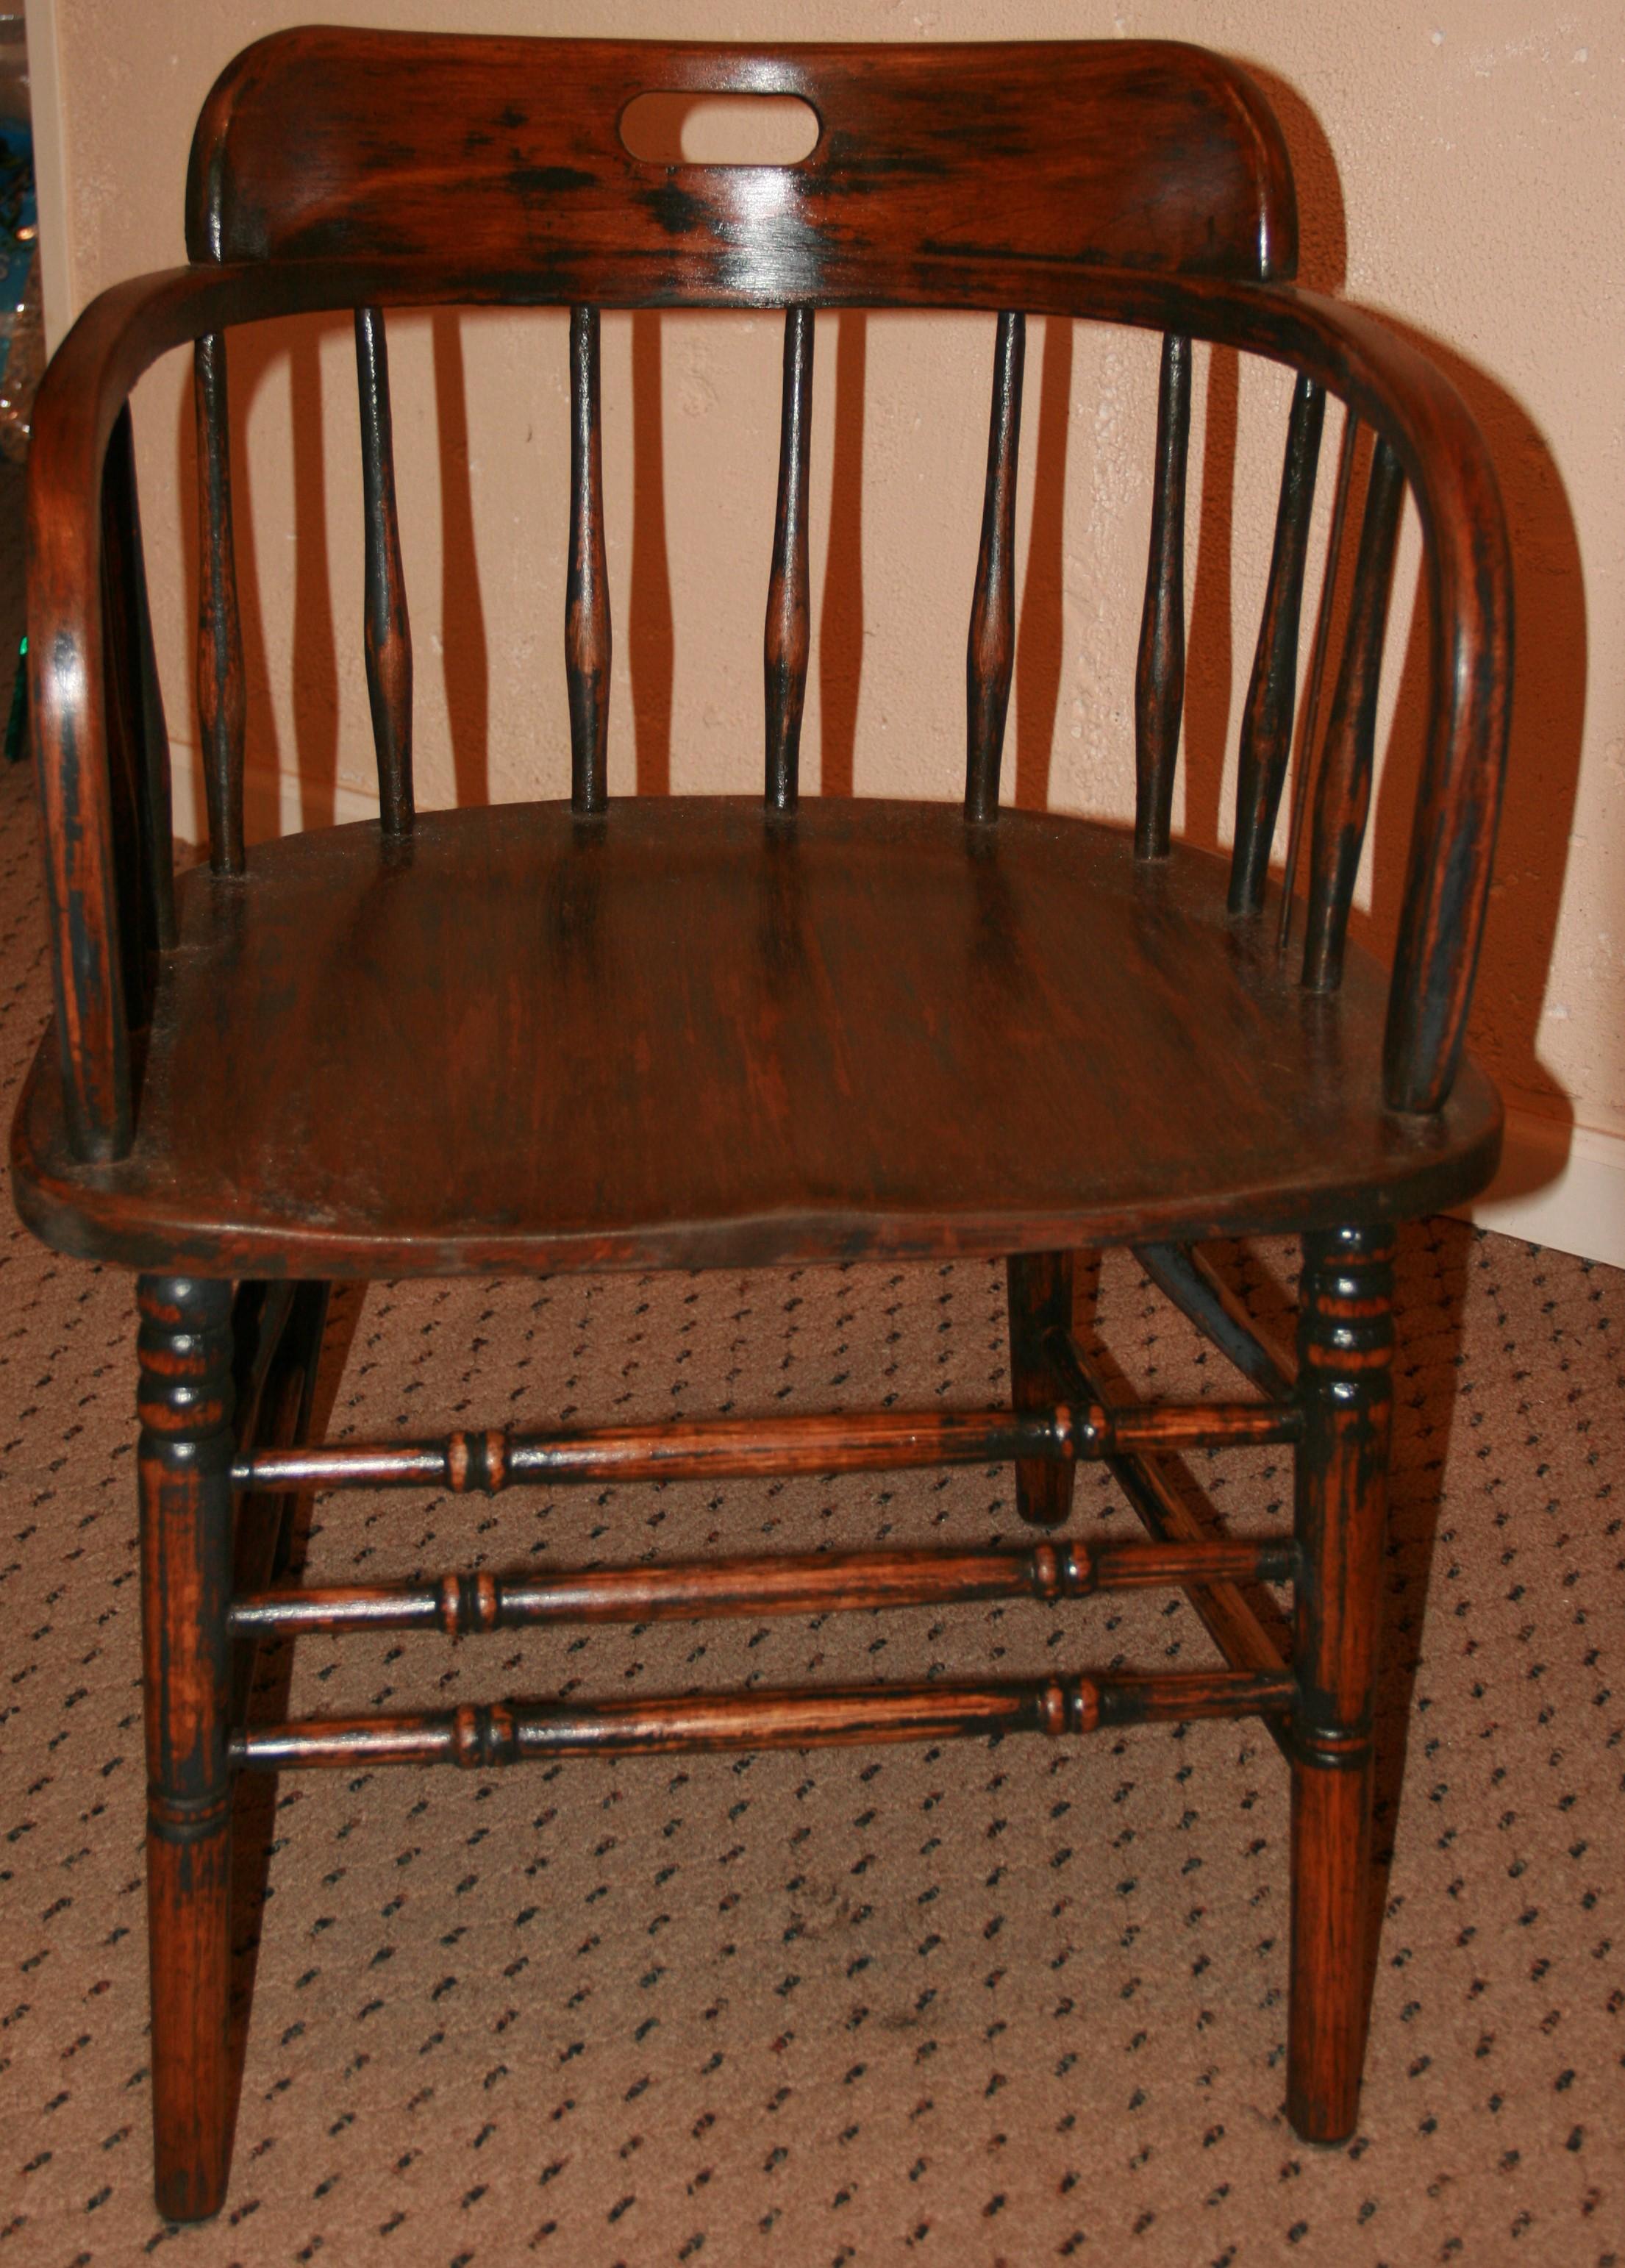 1920's chair